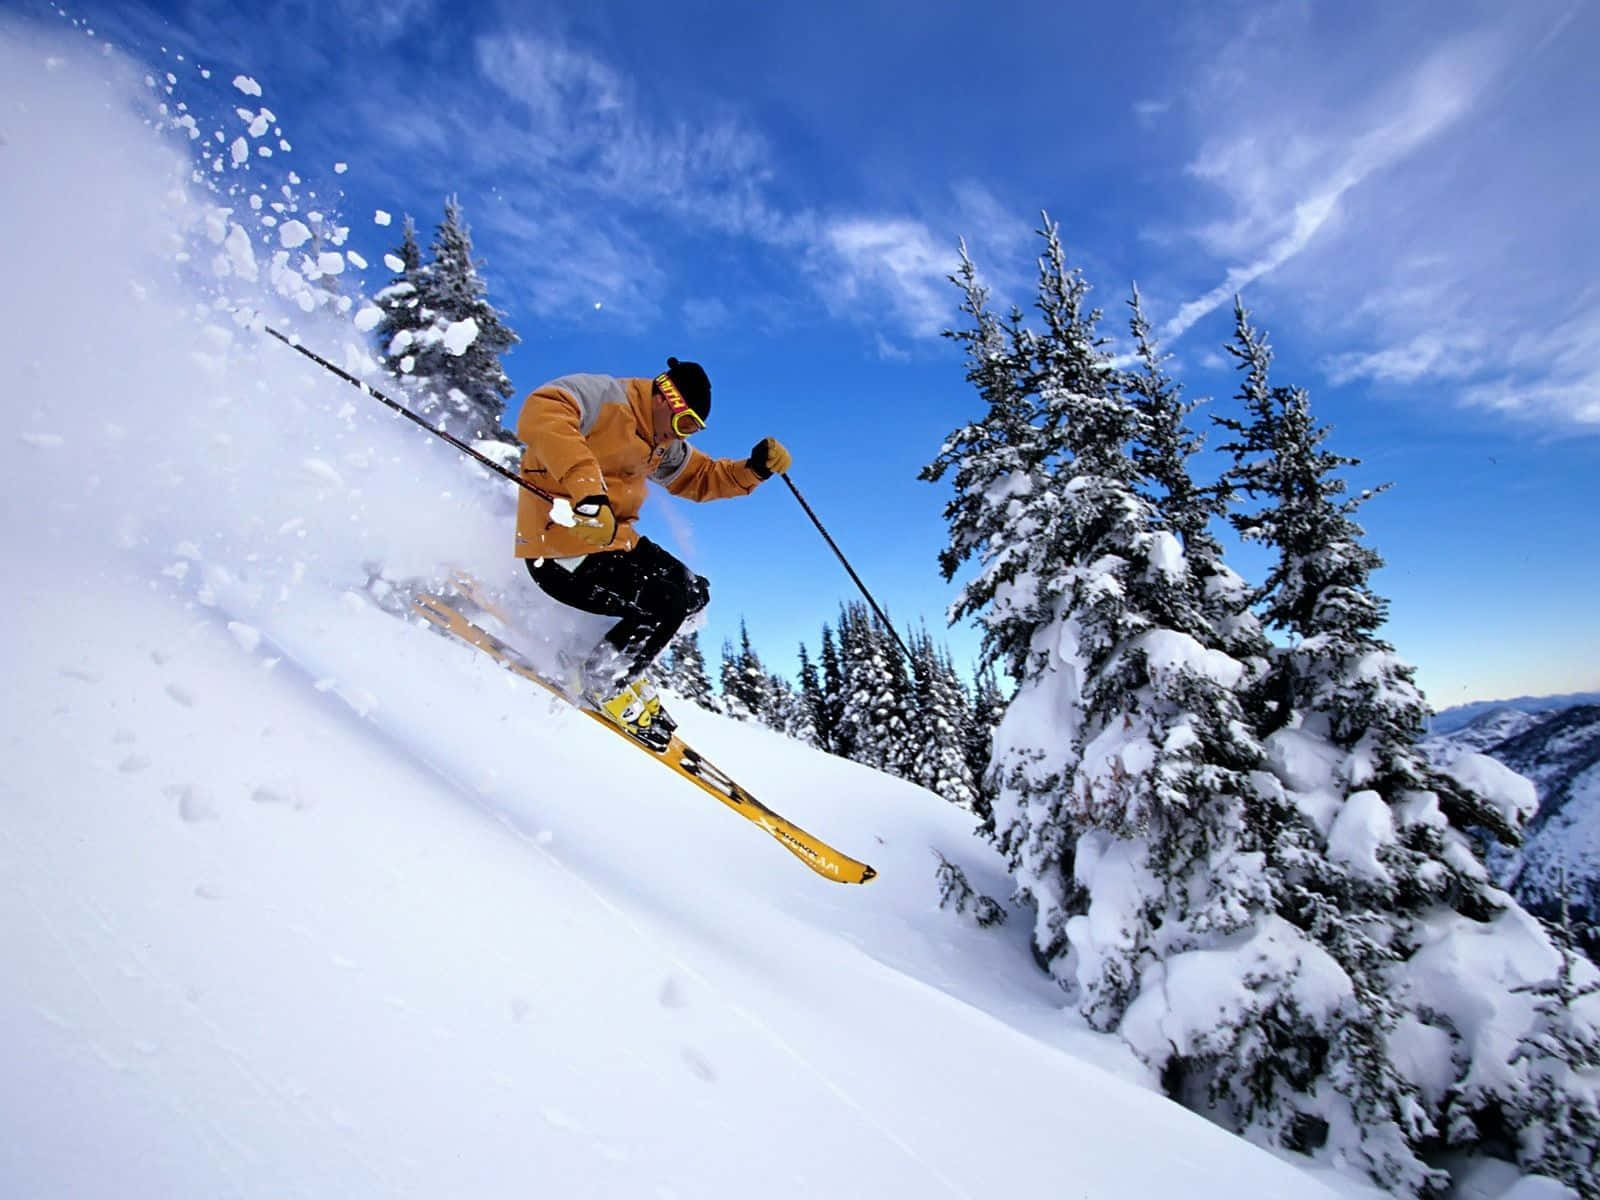 Skier gliding down the snow-covered mountain slope Wallpaper